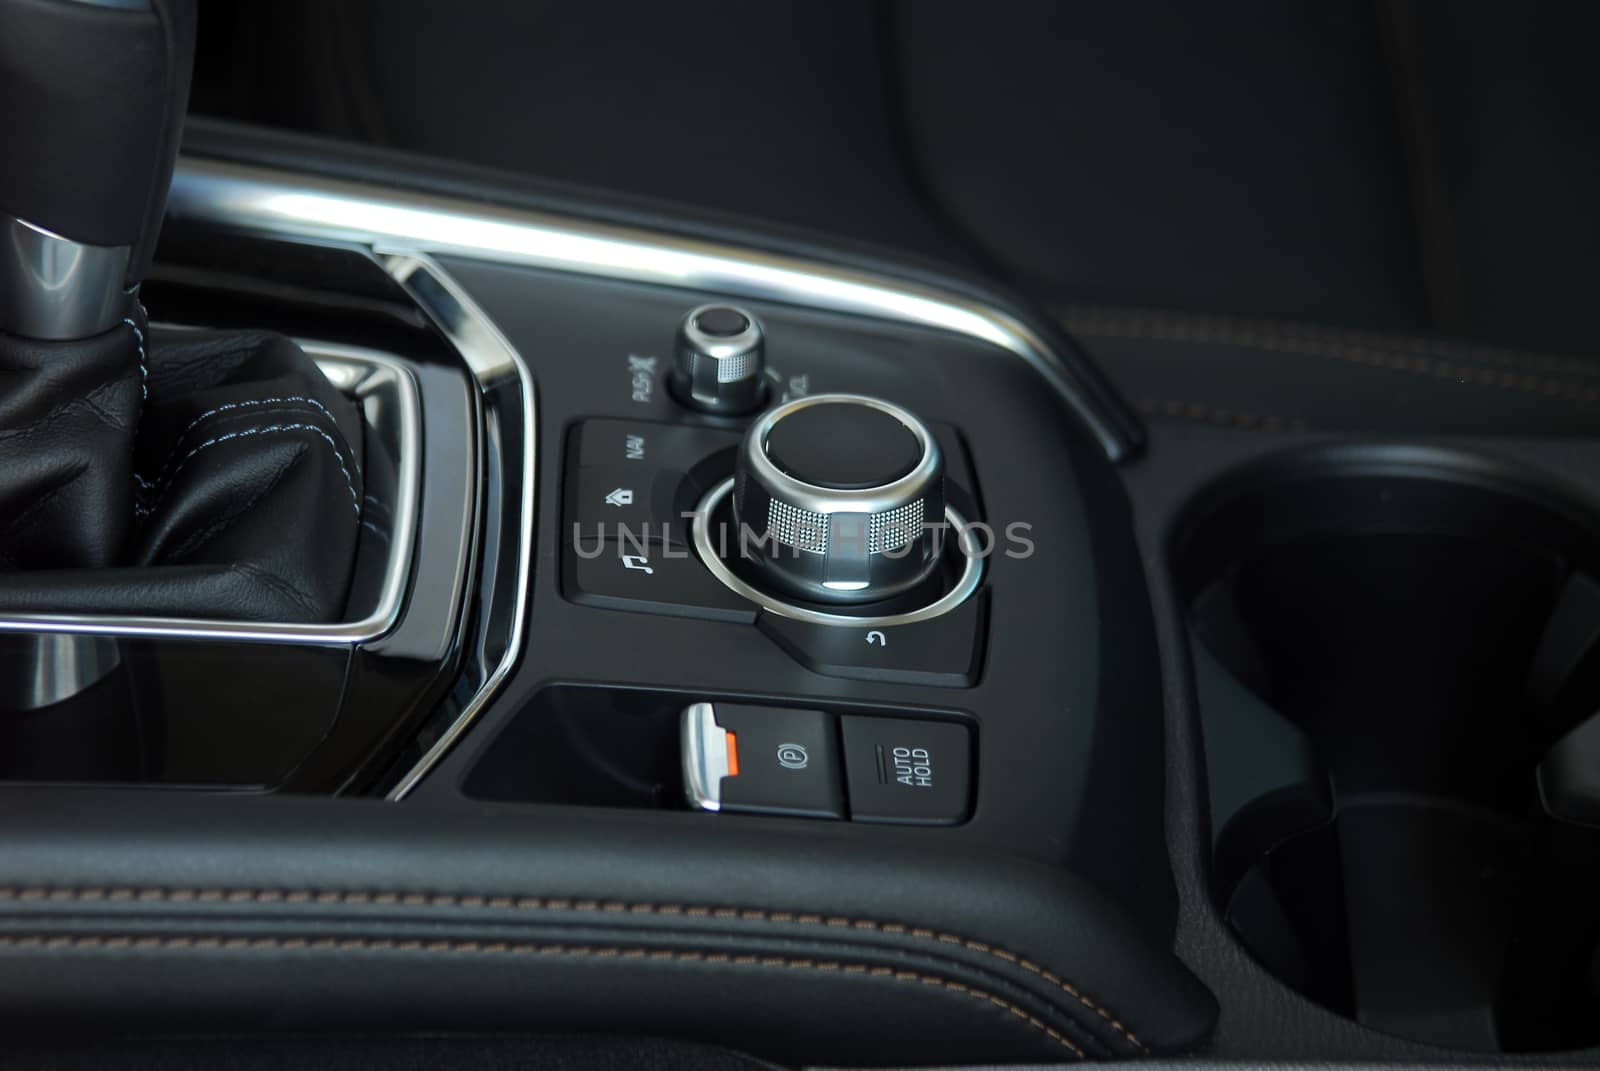 Car panel buttons by aselsa